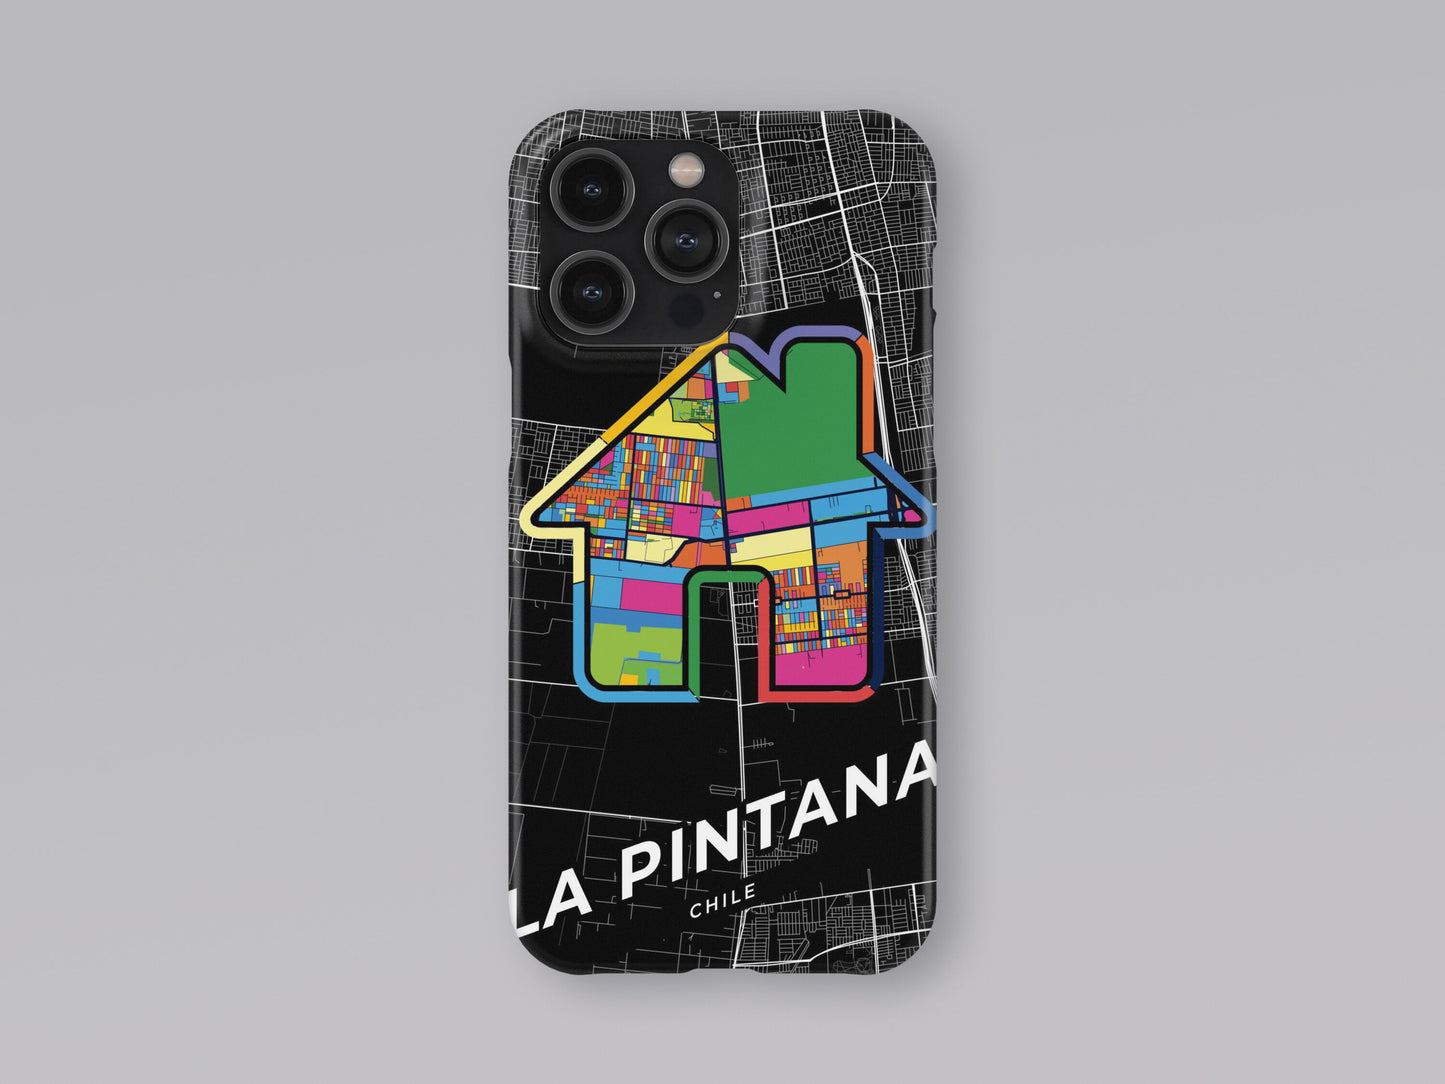 La Pintana Chile slim phone case with colorful icon. Birthday, wedding or housewarming gift. Couple match cases. 3